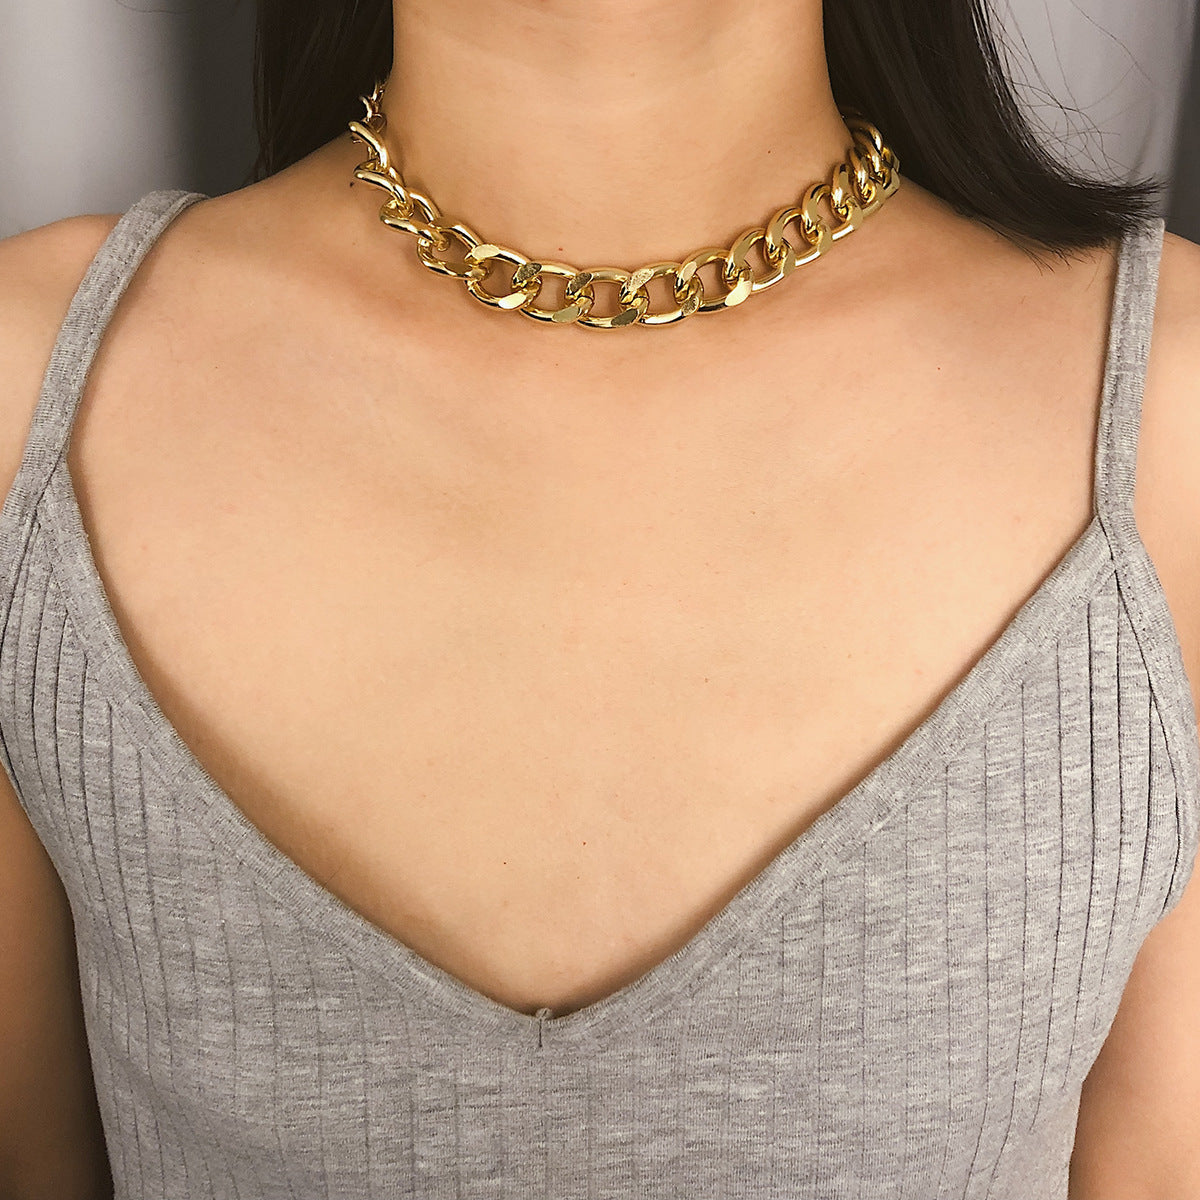 Choker exaggerated punk style lady necklace